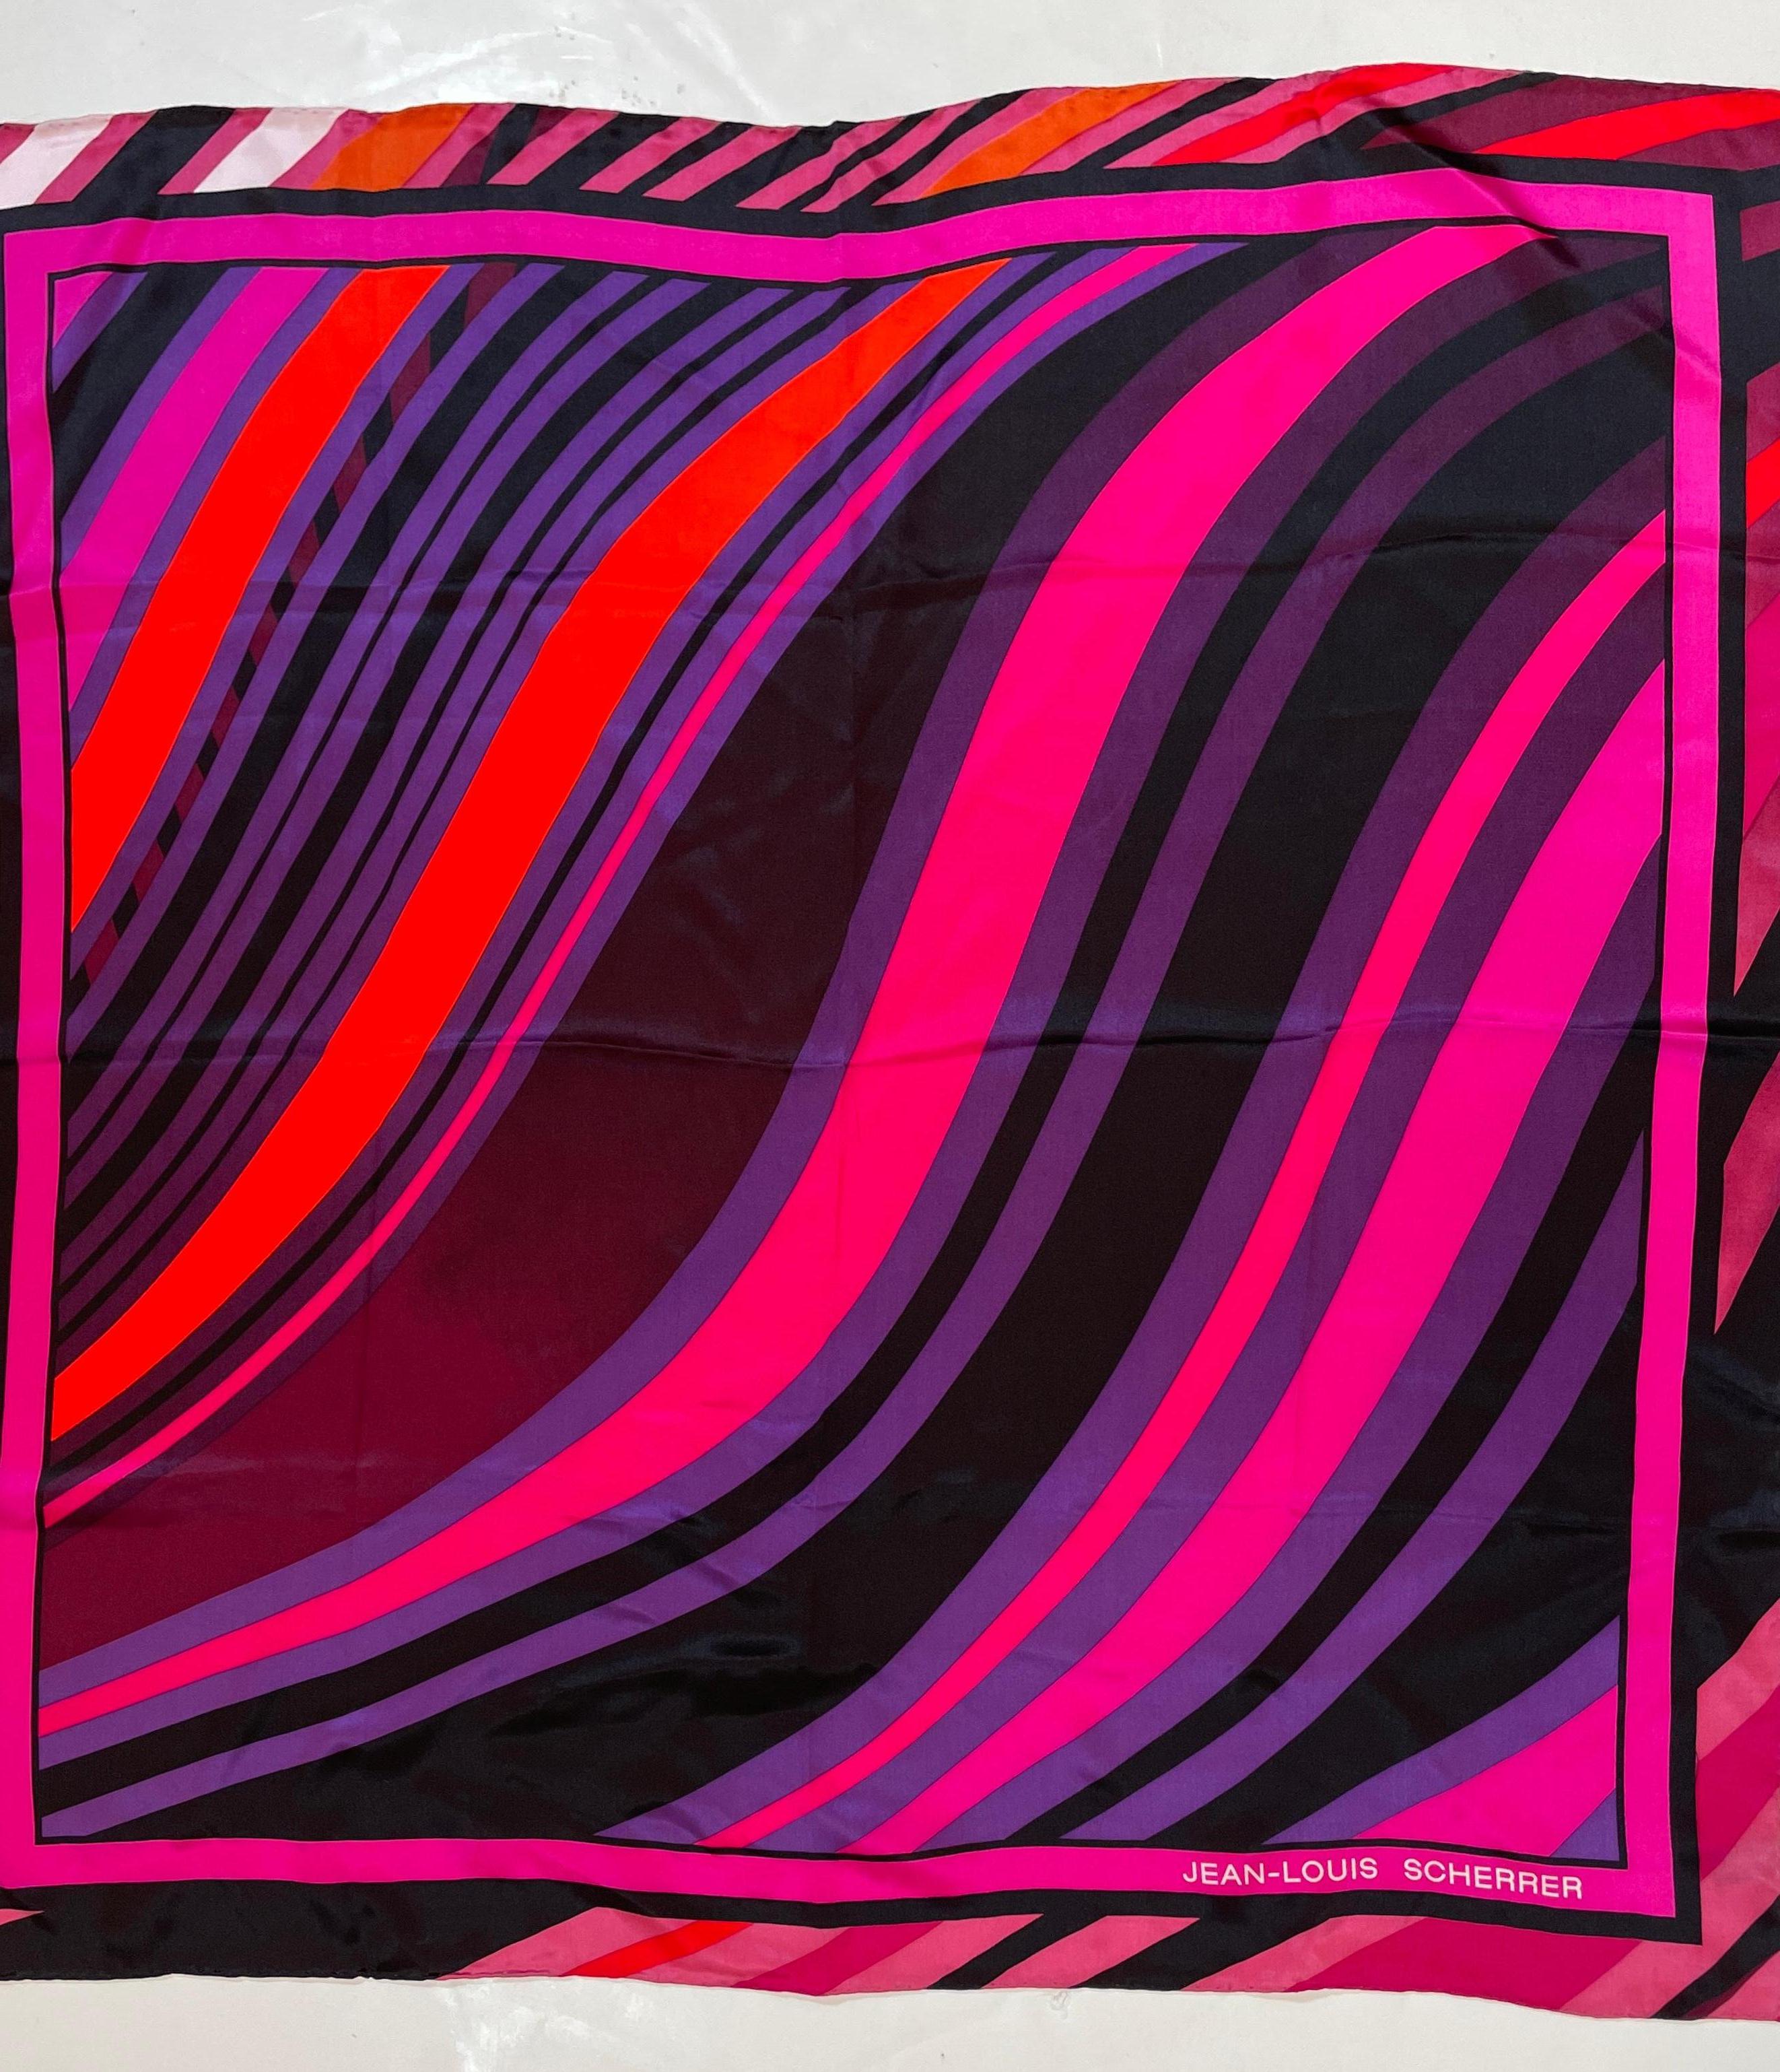 Jean-Louis Scherrer Paris Silk Scarf.
A genuine vintage silk scarf crafted by Jean-Louis Scherrer in the heart of Paris. This exquisite piece adorned with a charming abstract painterly design in hot pink, purple, and black design, creating a